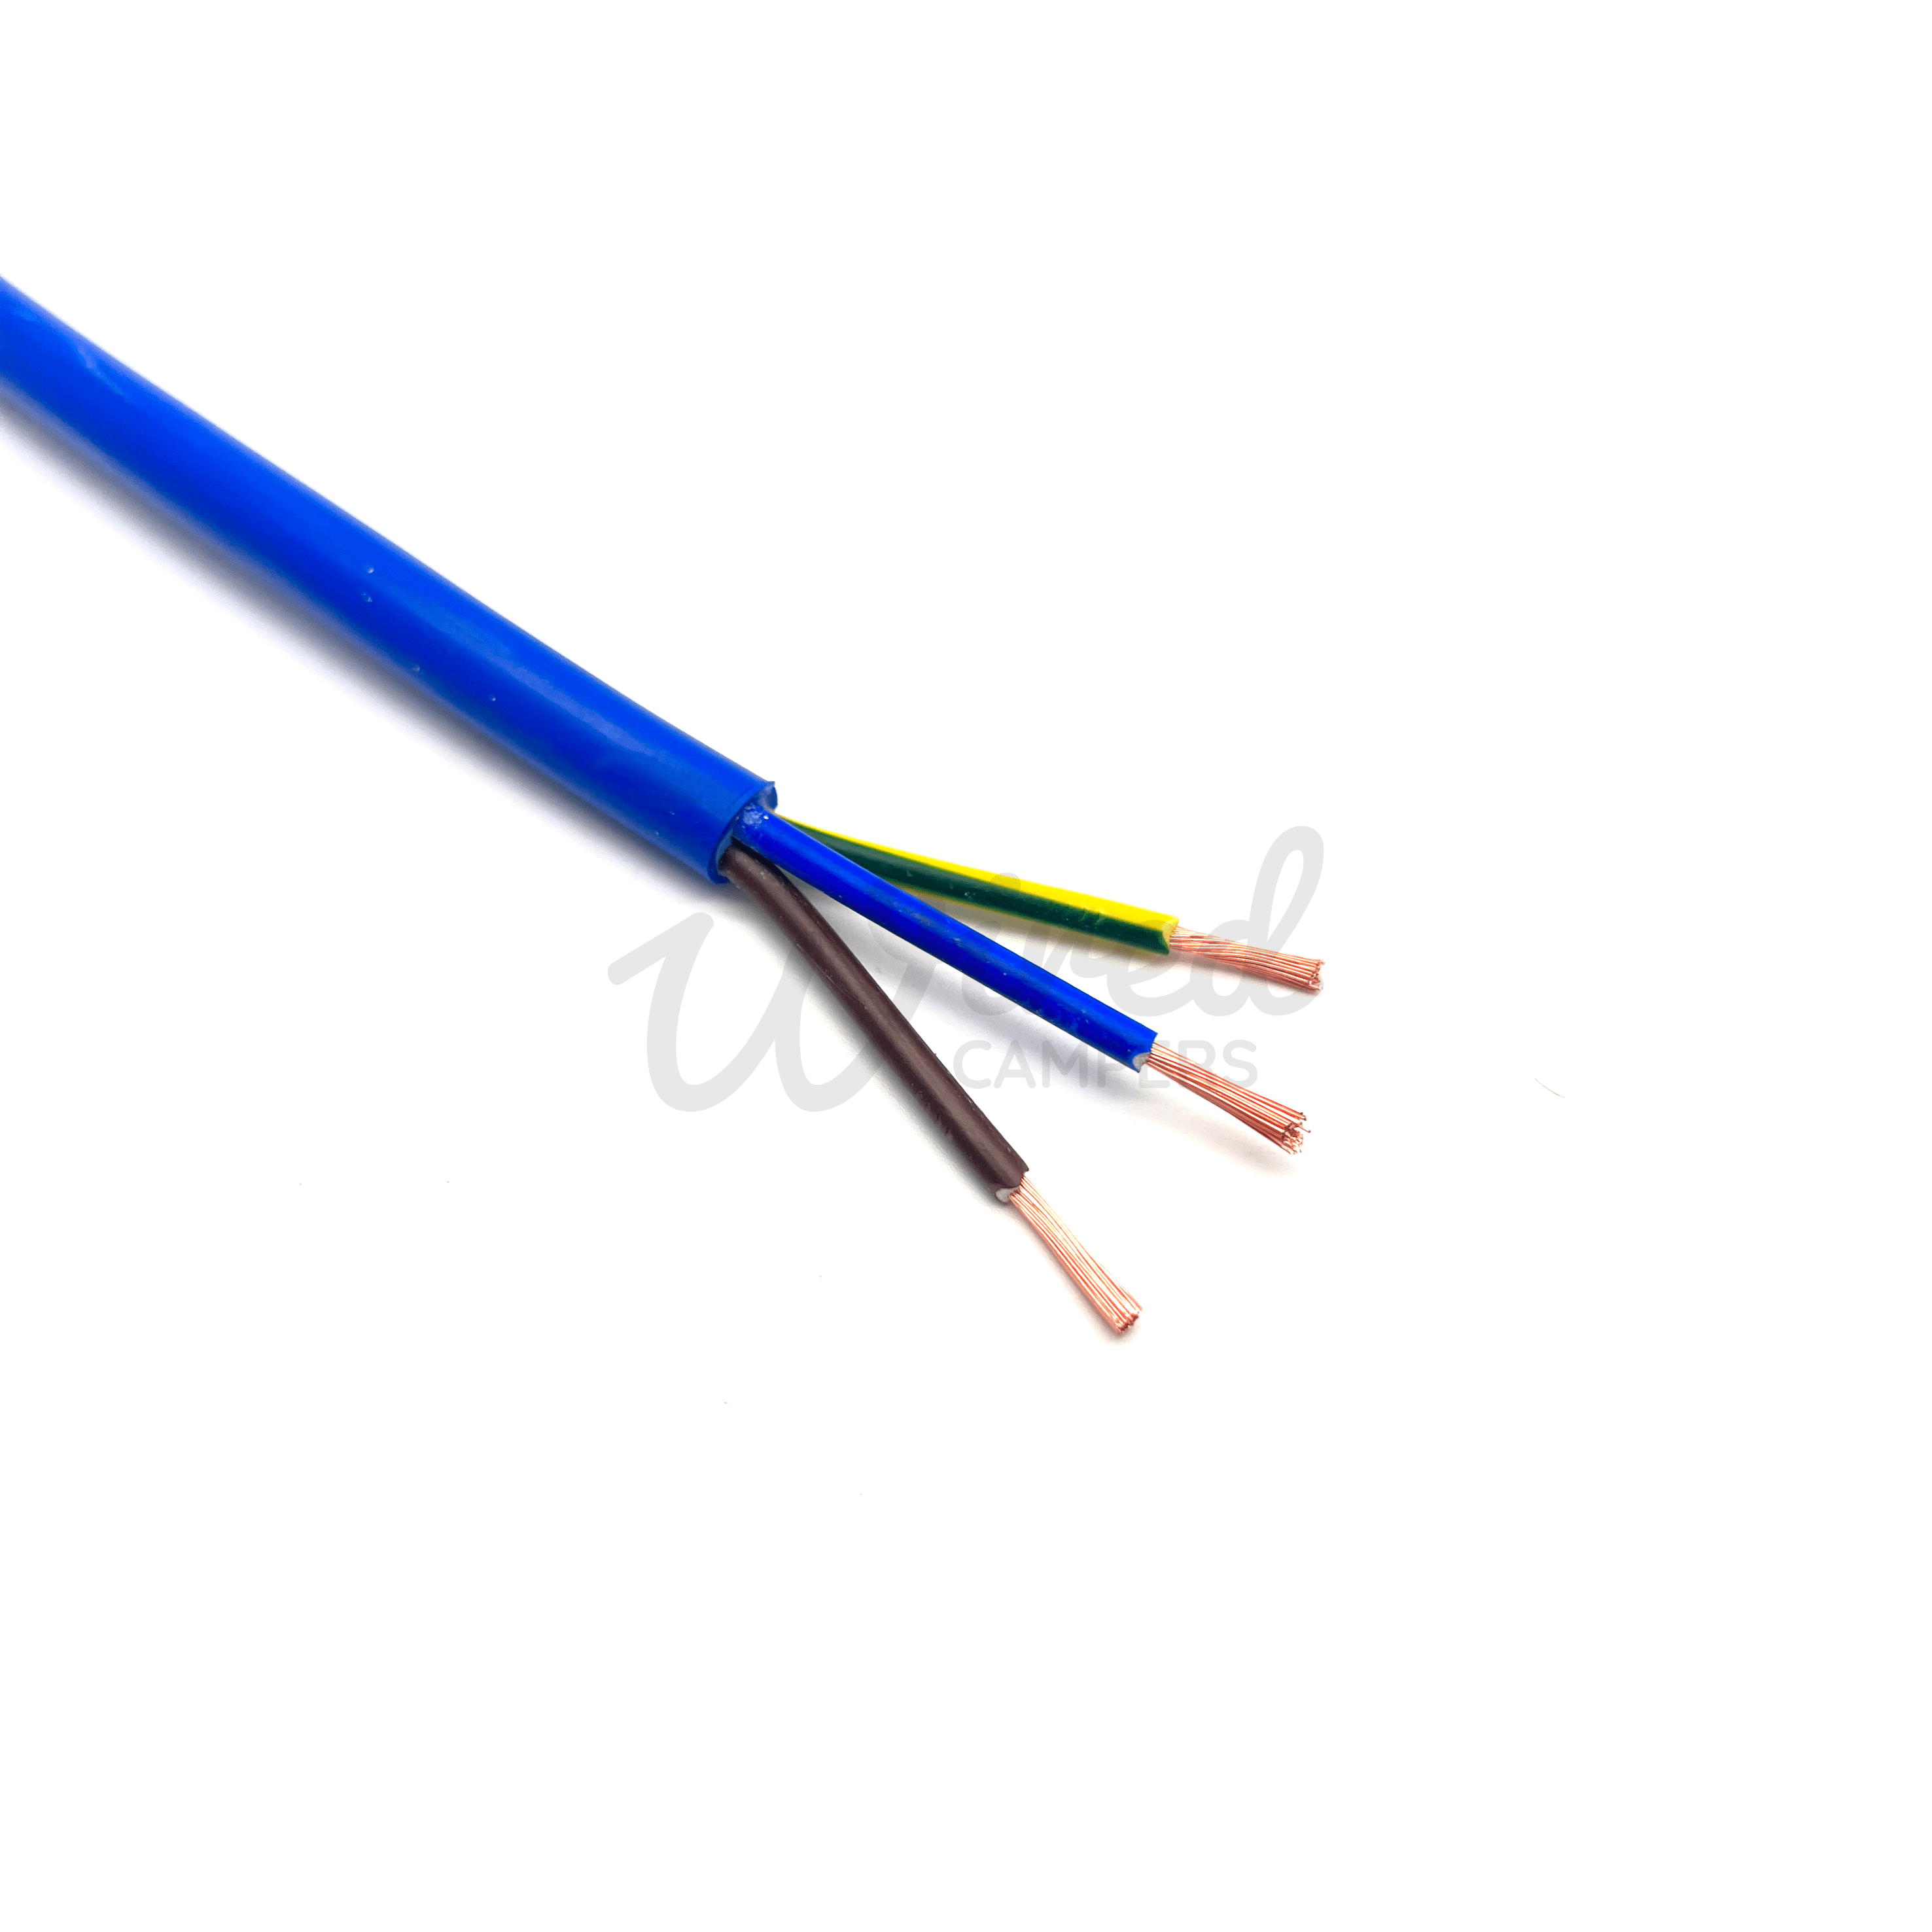 Wired Campers Limited 10M 3 Core Blue Arctic Grade 2.5mm2 Flexible Round Cable 300/500V BS6004